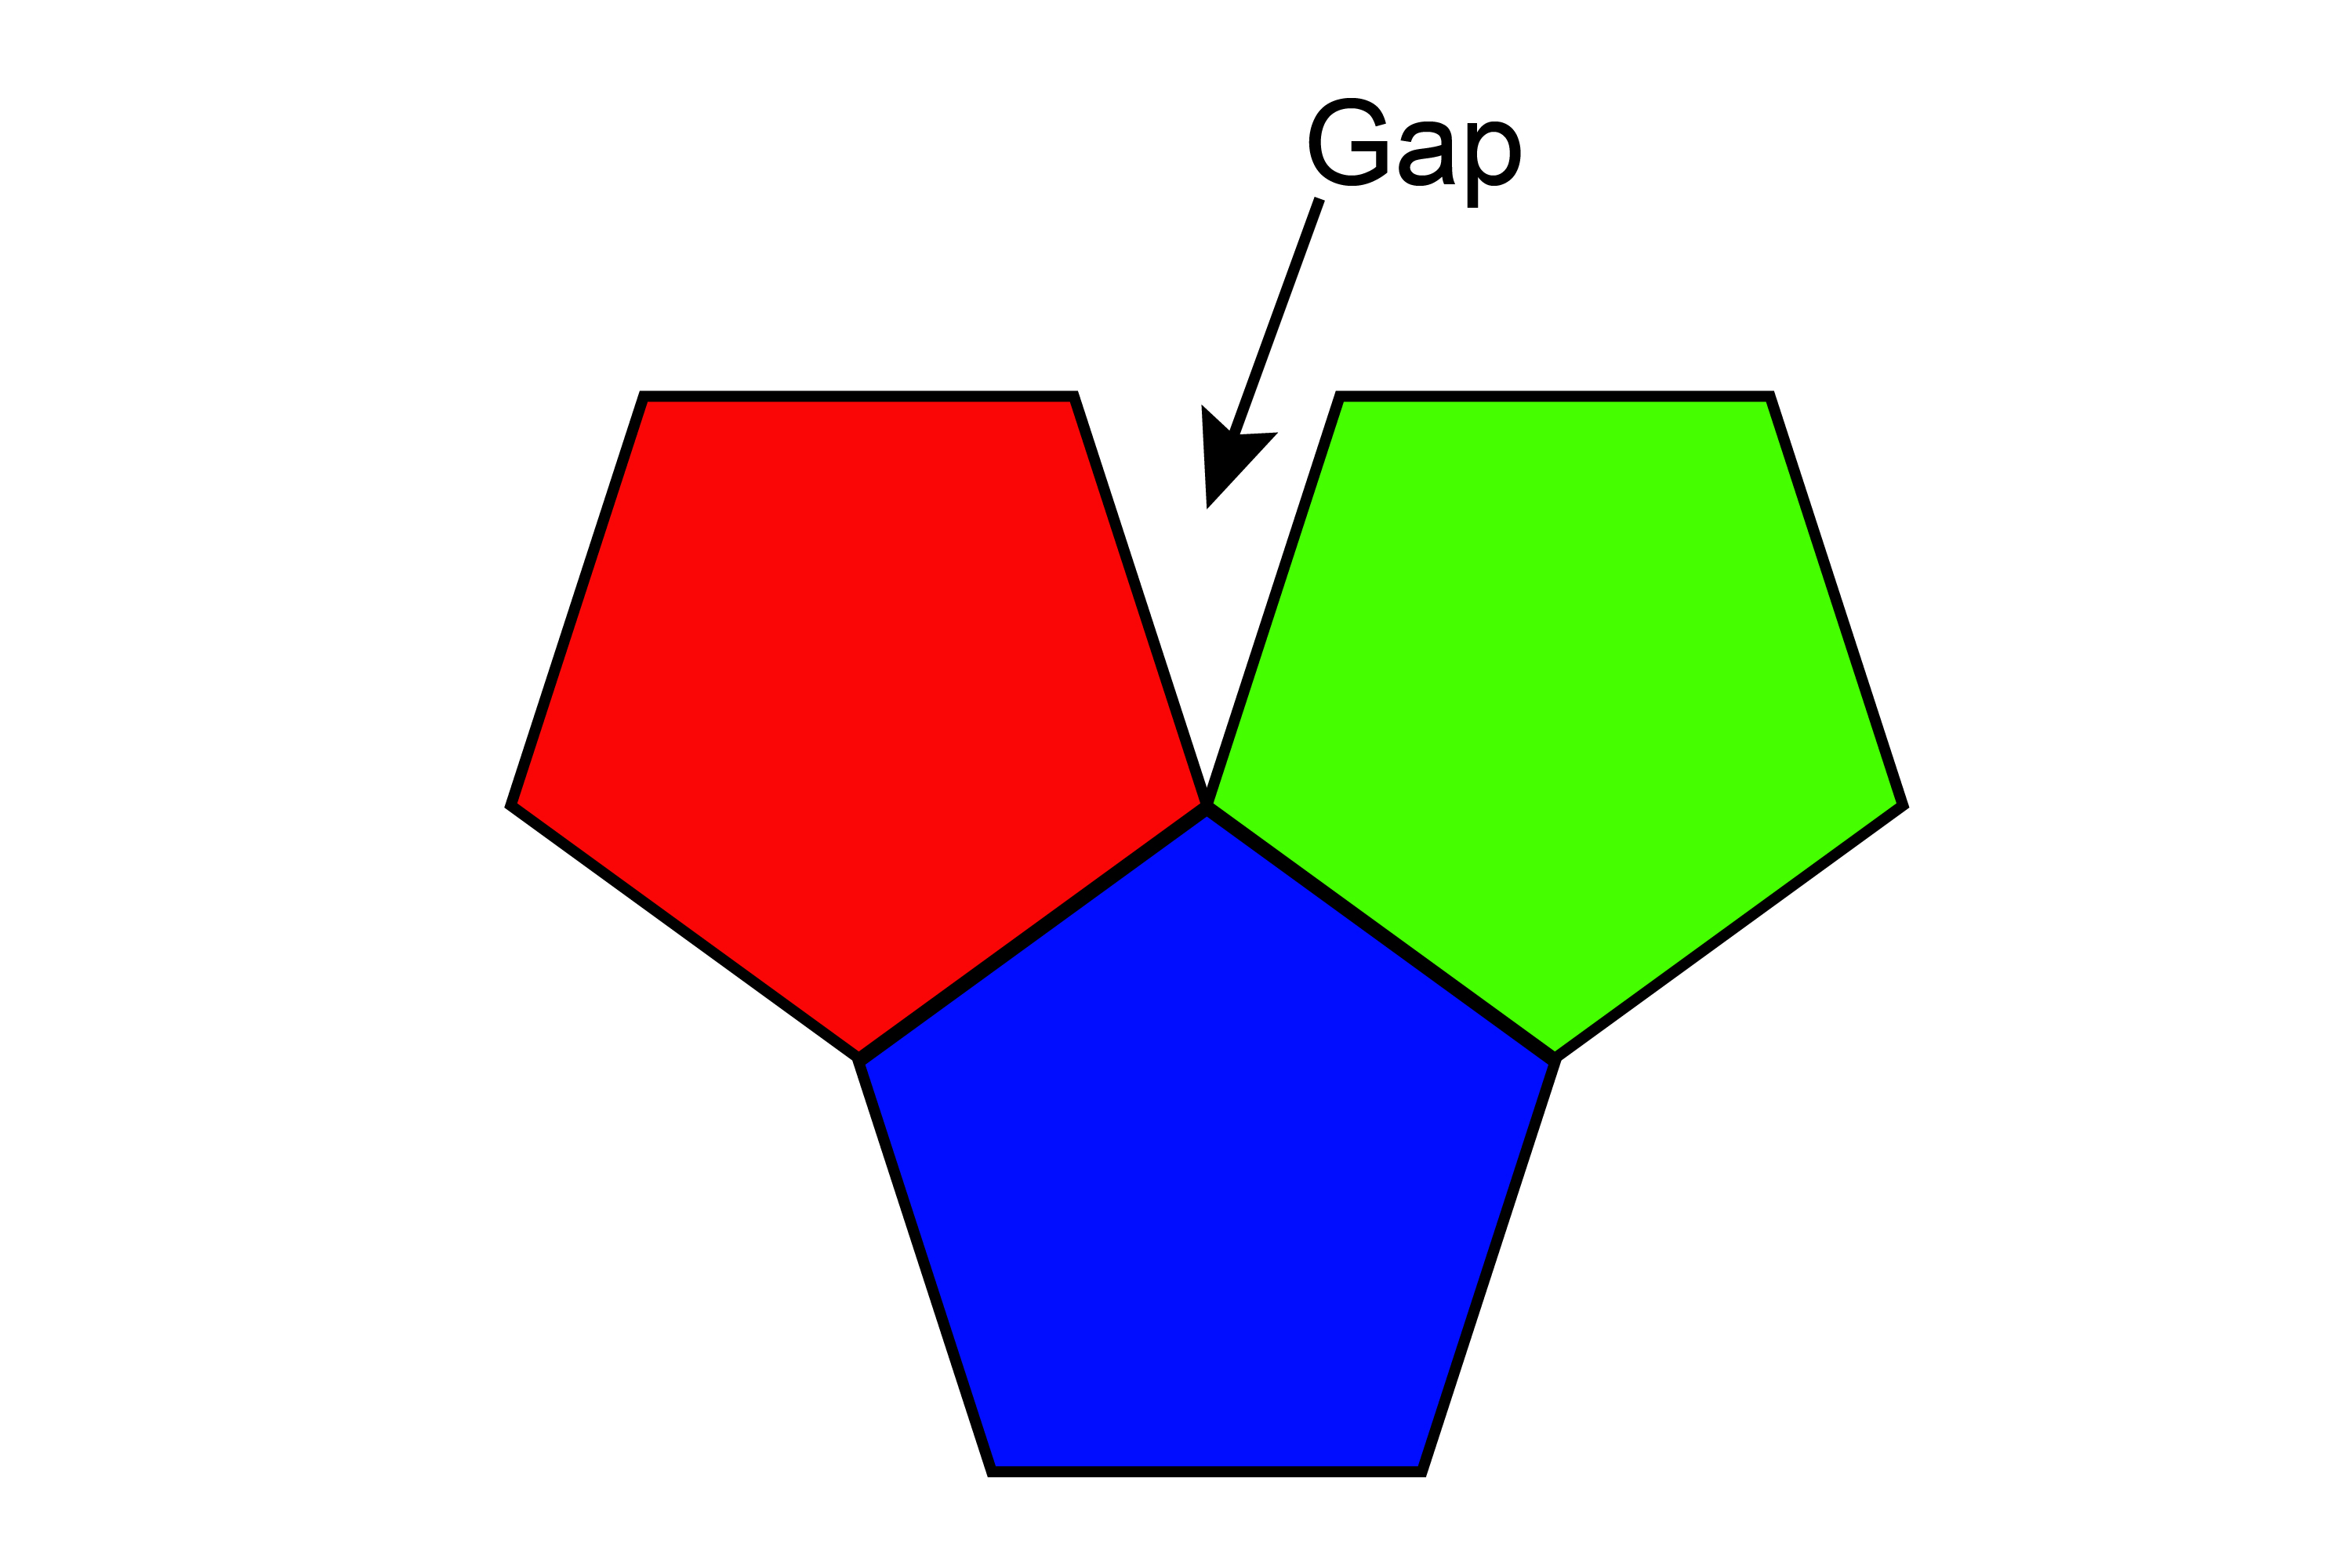 Pentagons don’t tessellate meaning the gap made another pentagon wont fit